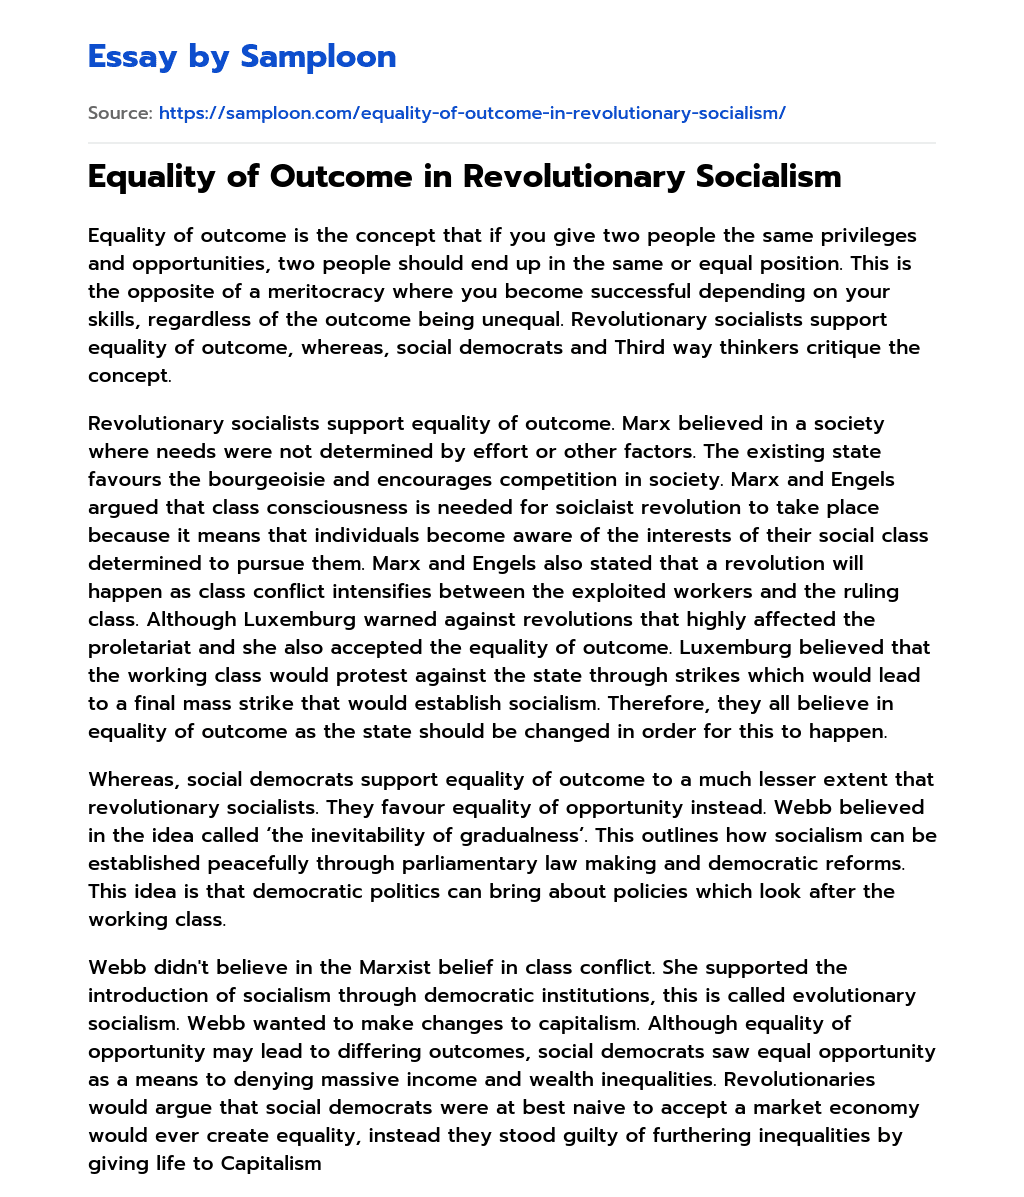 Equality of Outcome in Revolutionary Socialism essay